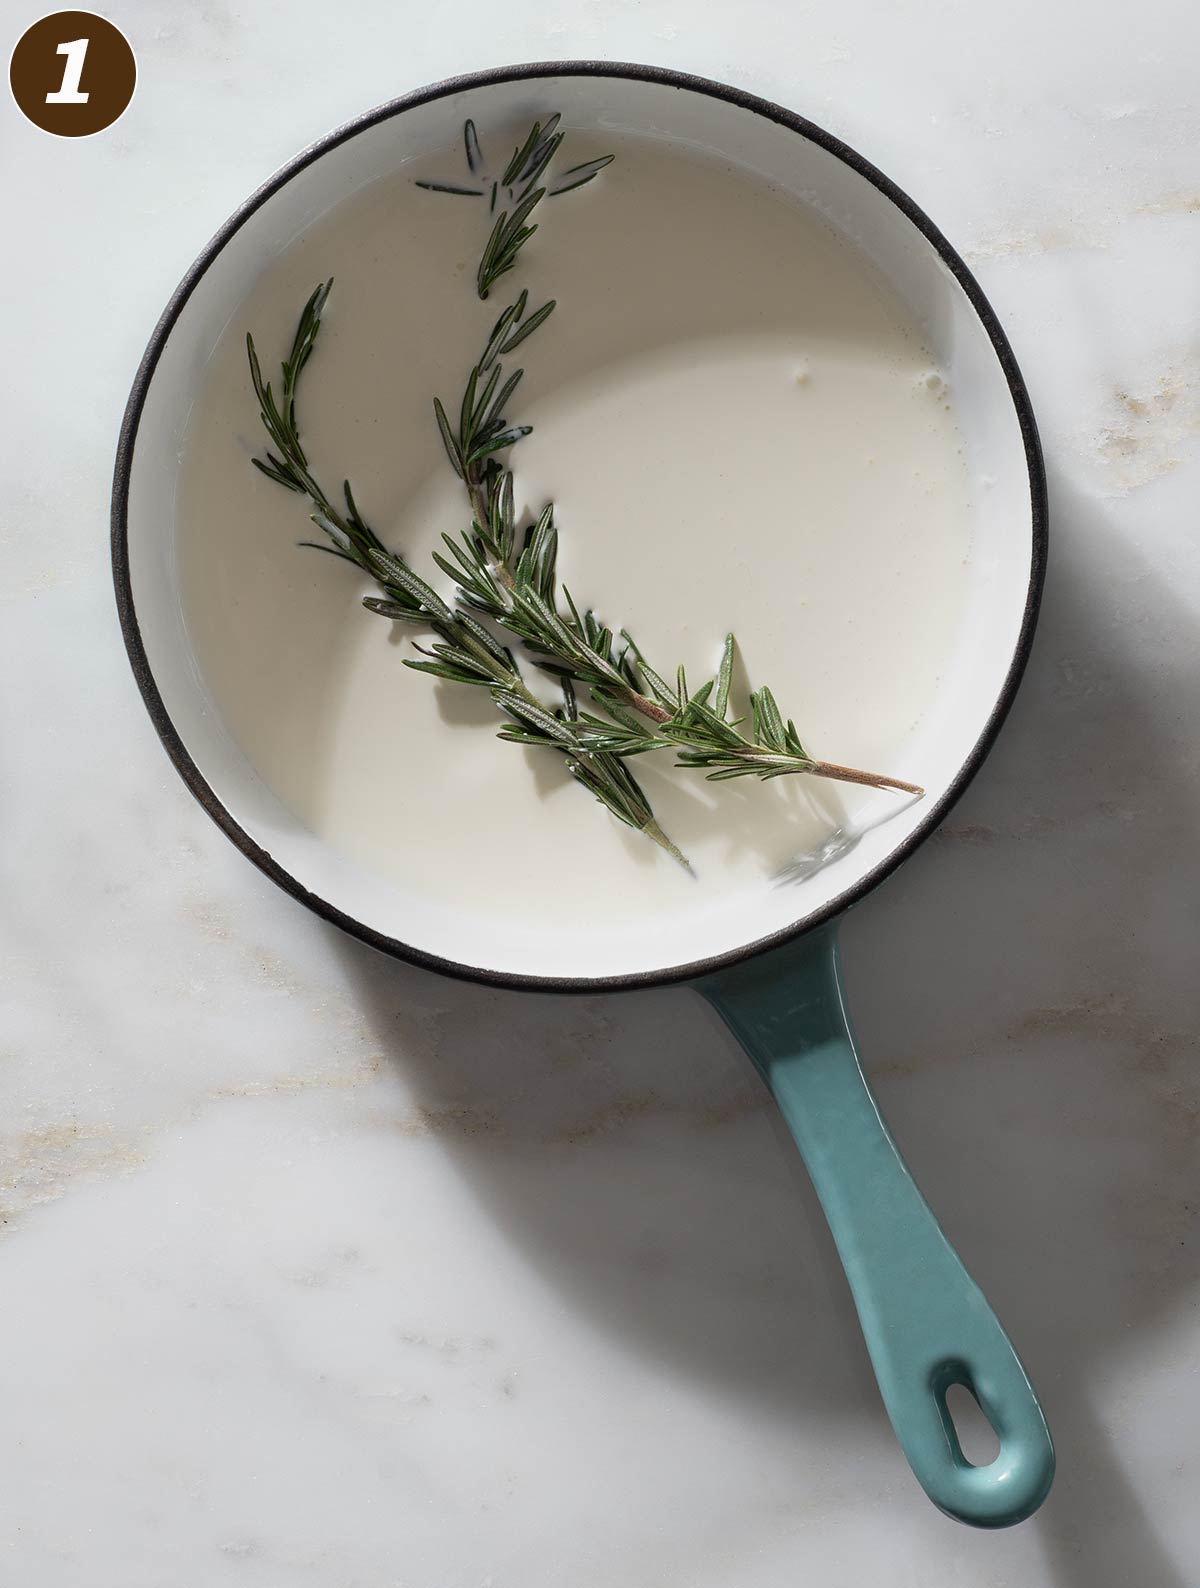 Rosemary and cream in a saucepan.